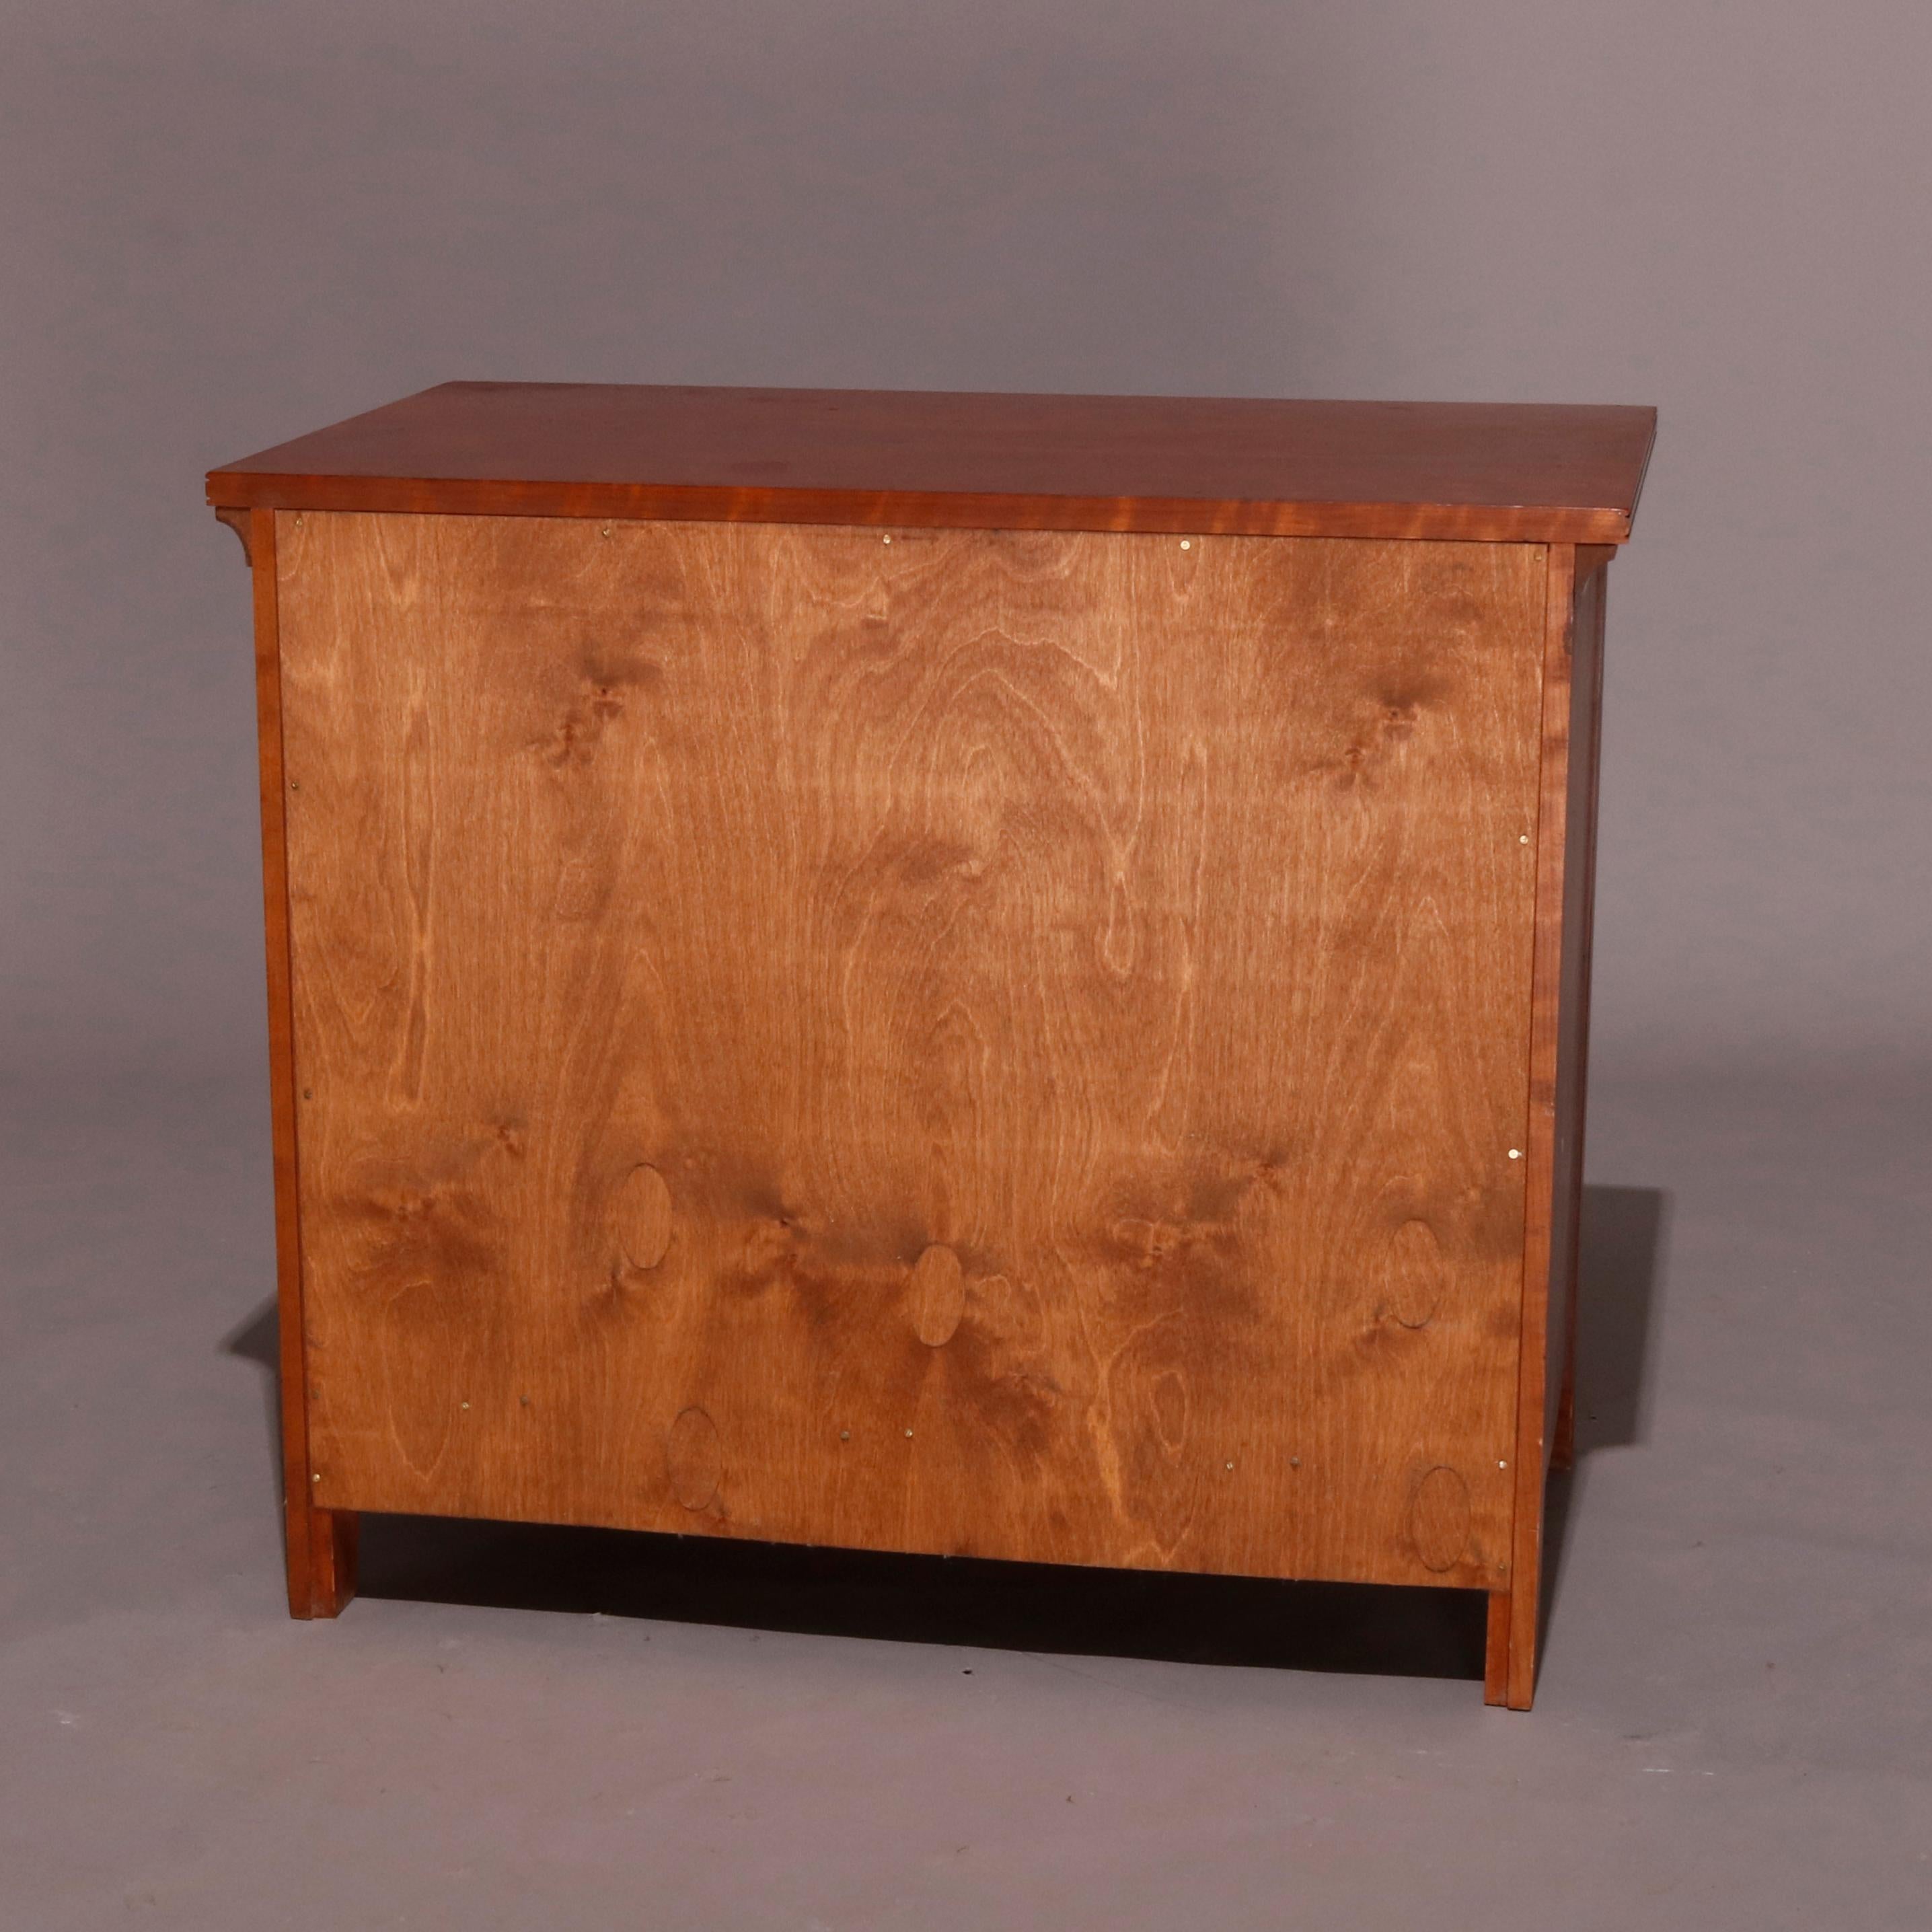 20th Century Americana Shaker Style Cherry and Tiger Maple Diminutive 4-Drawer Chest